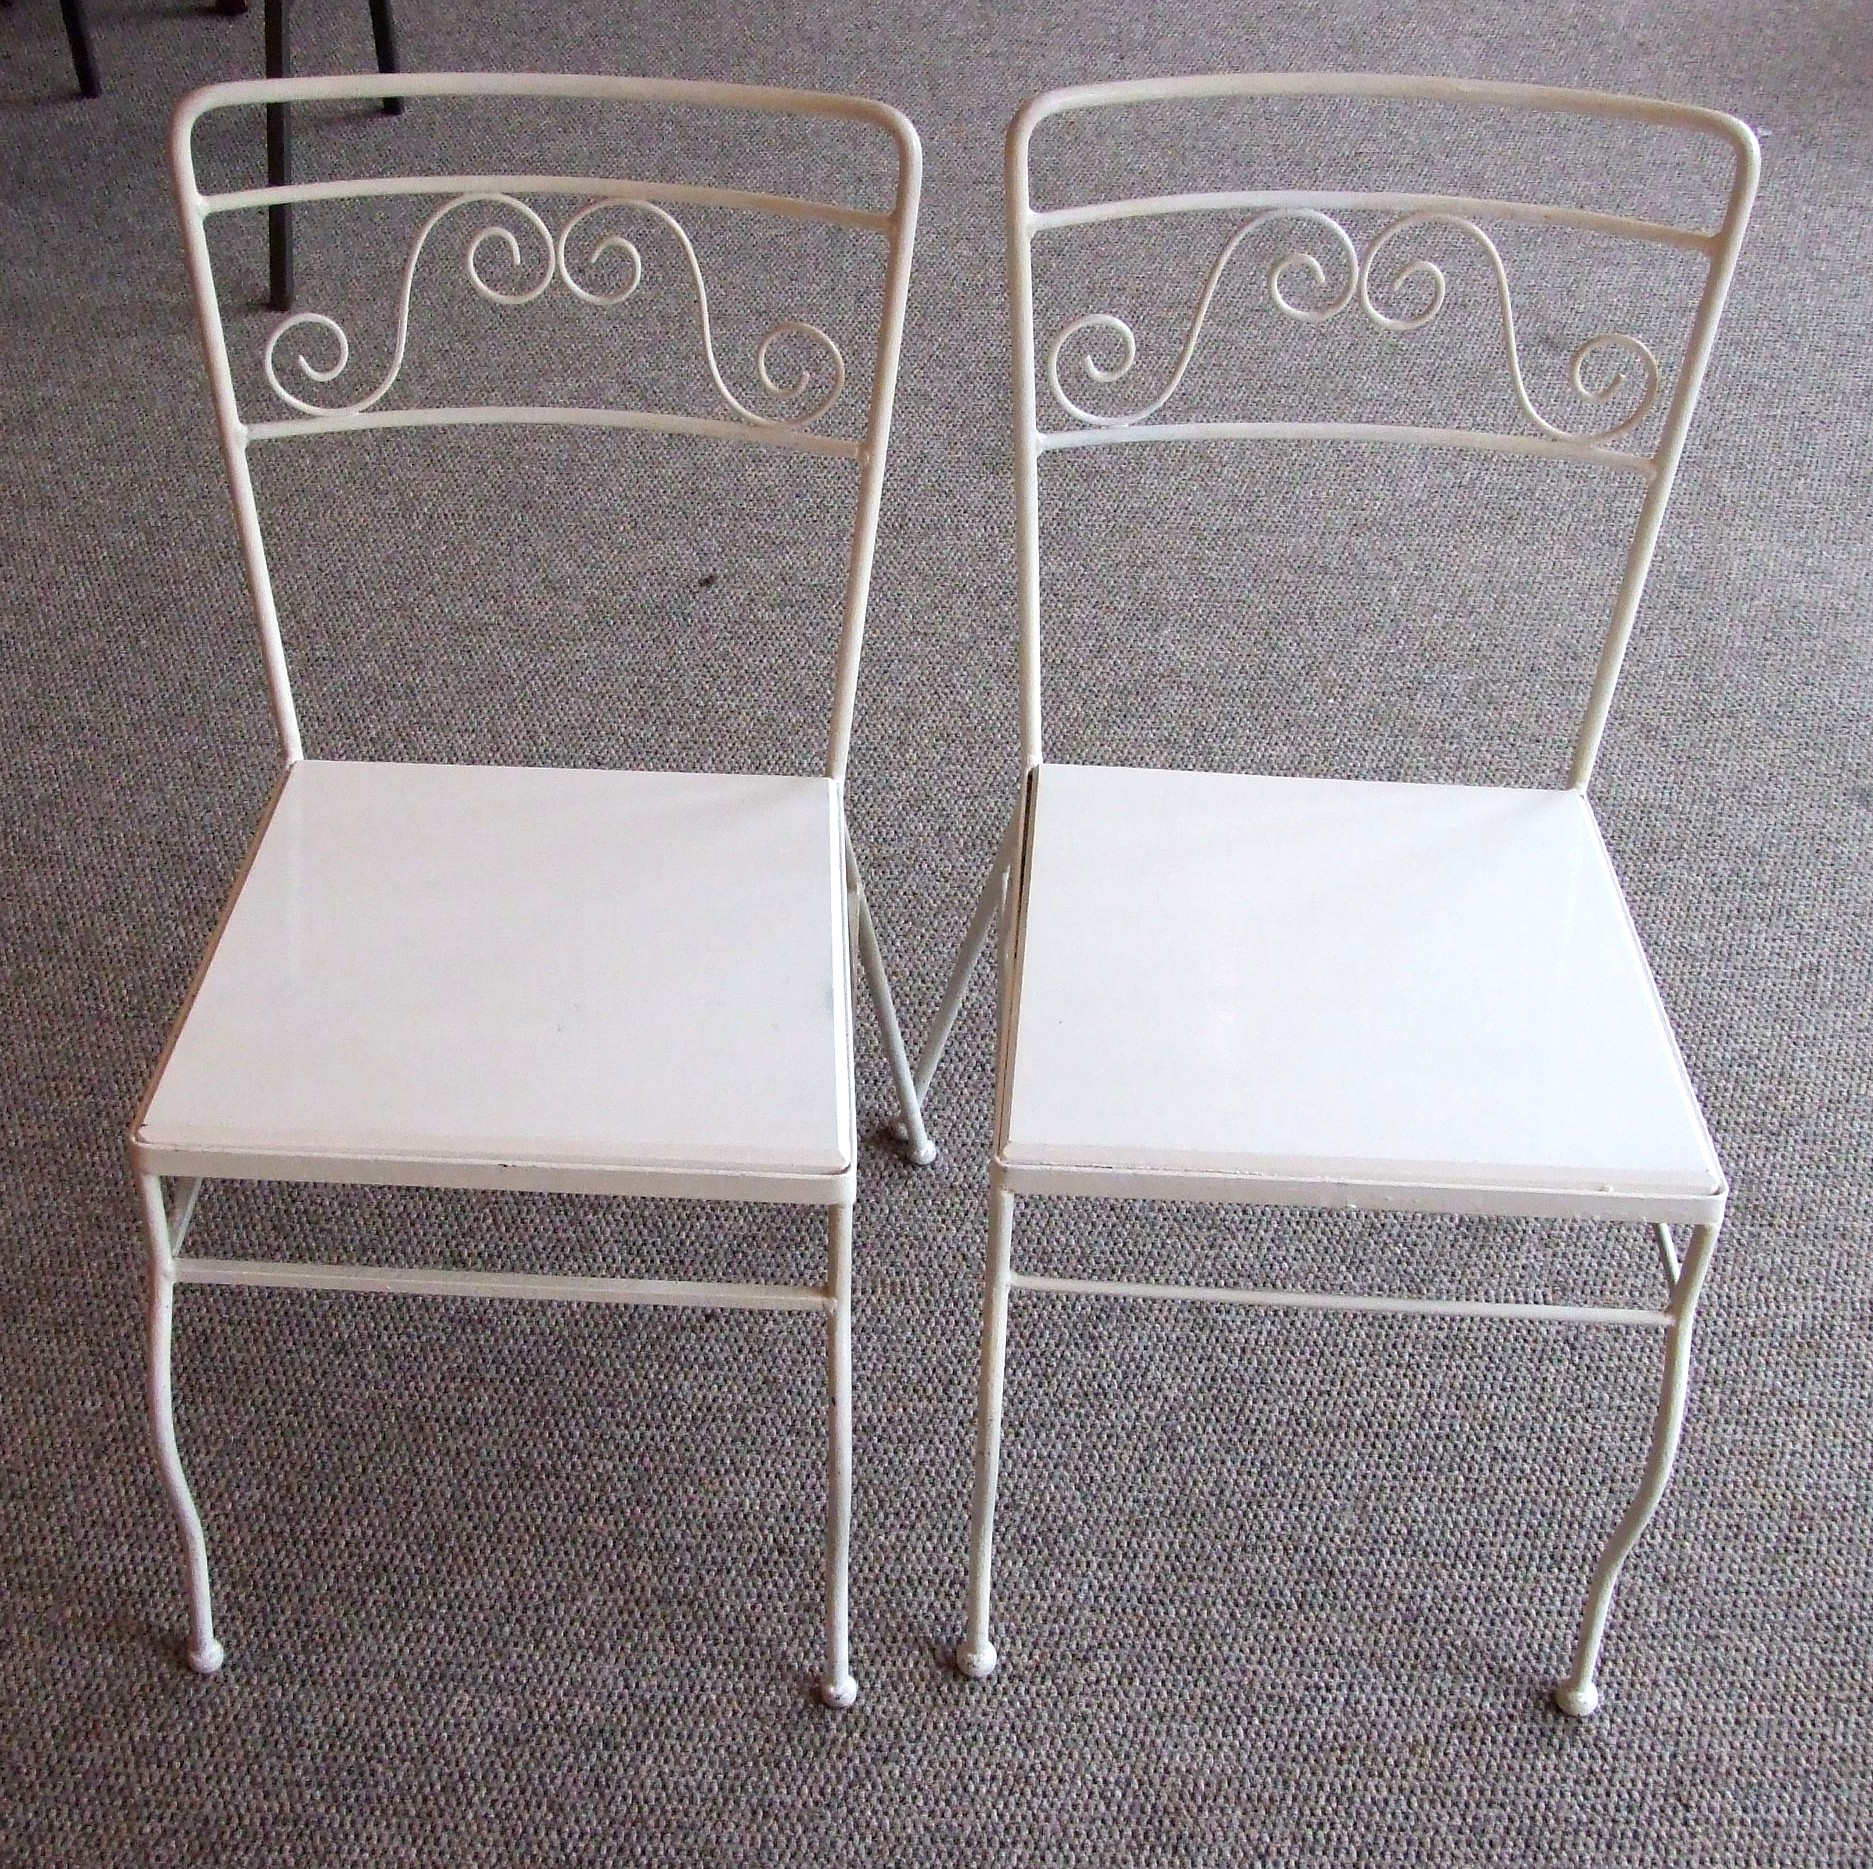 Pair of Wrought Iron Framed Patio Chairs.